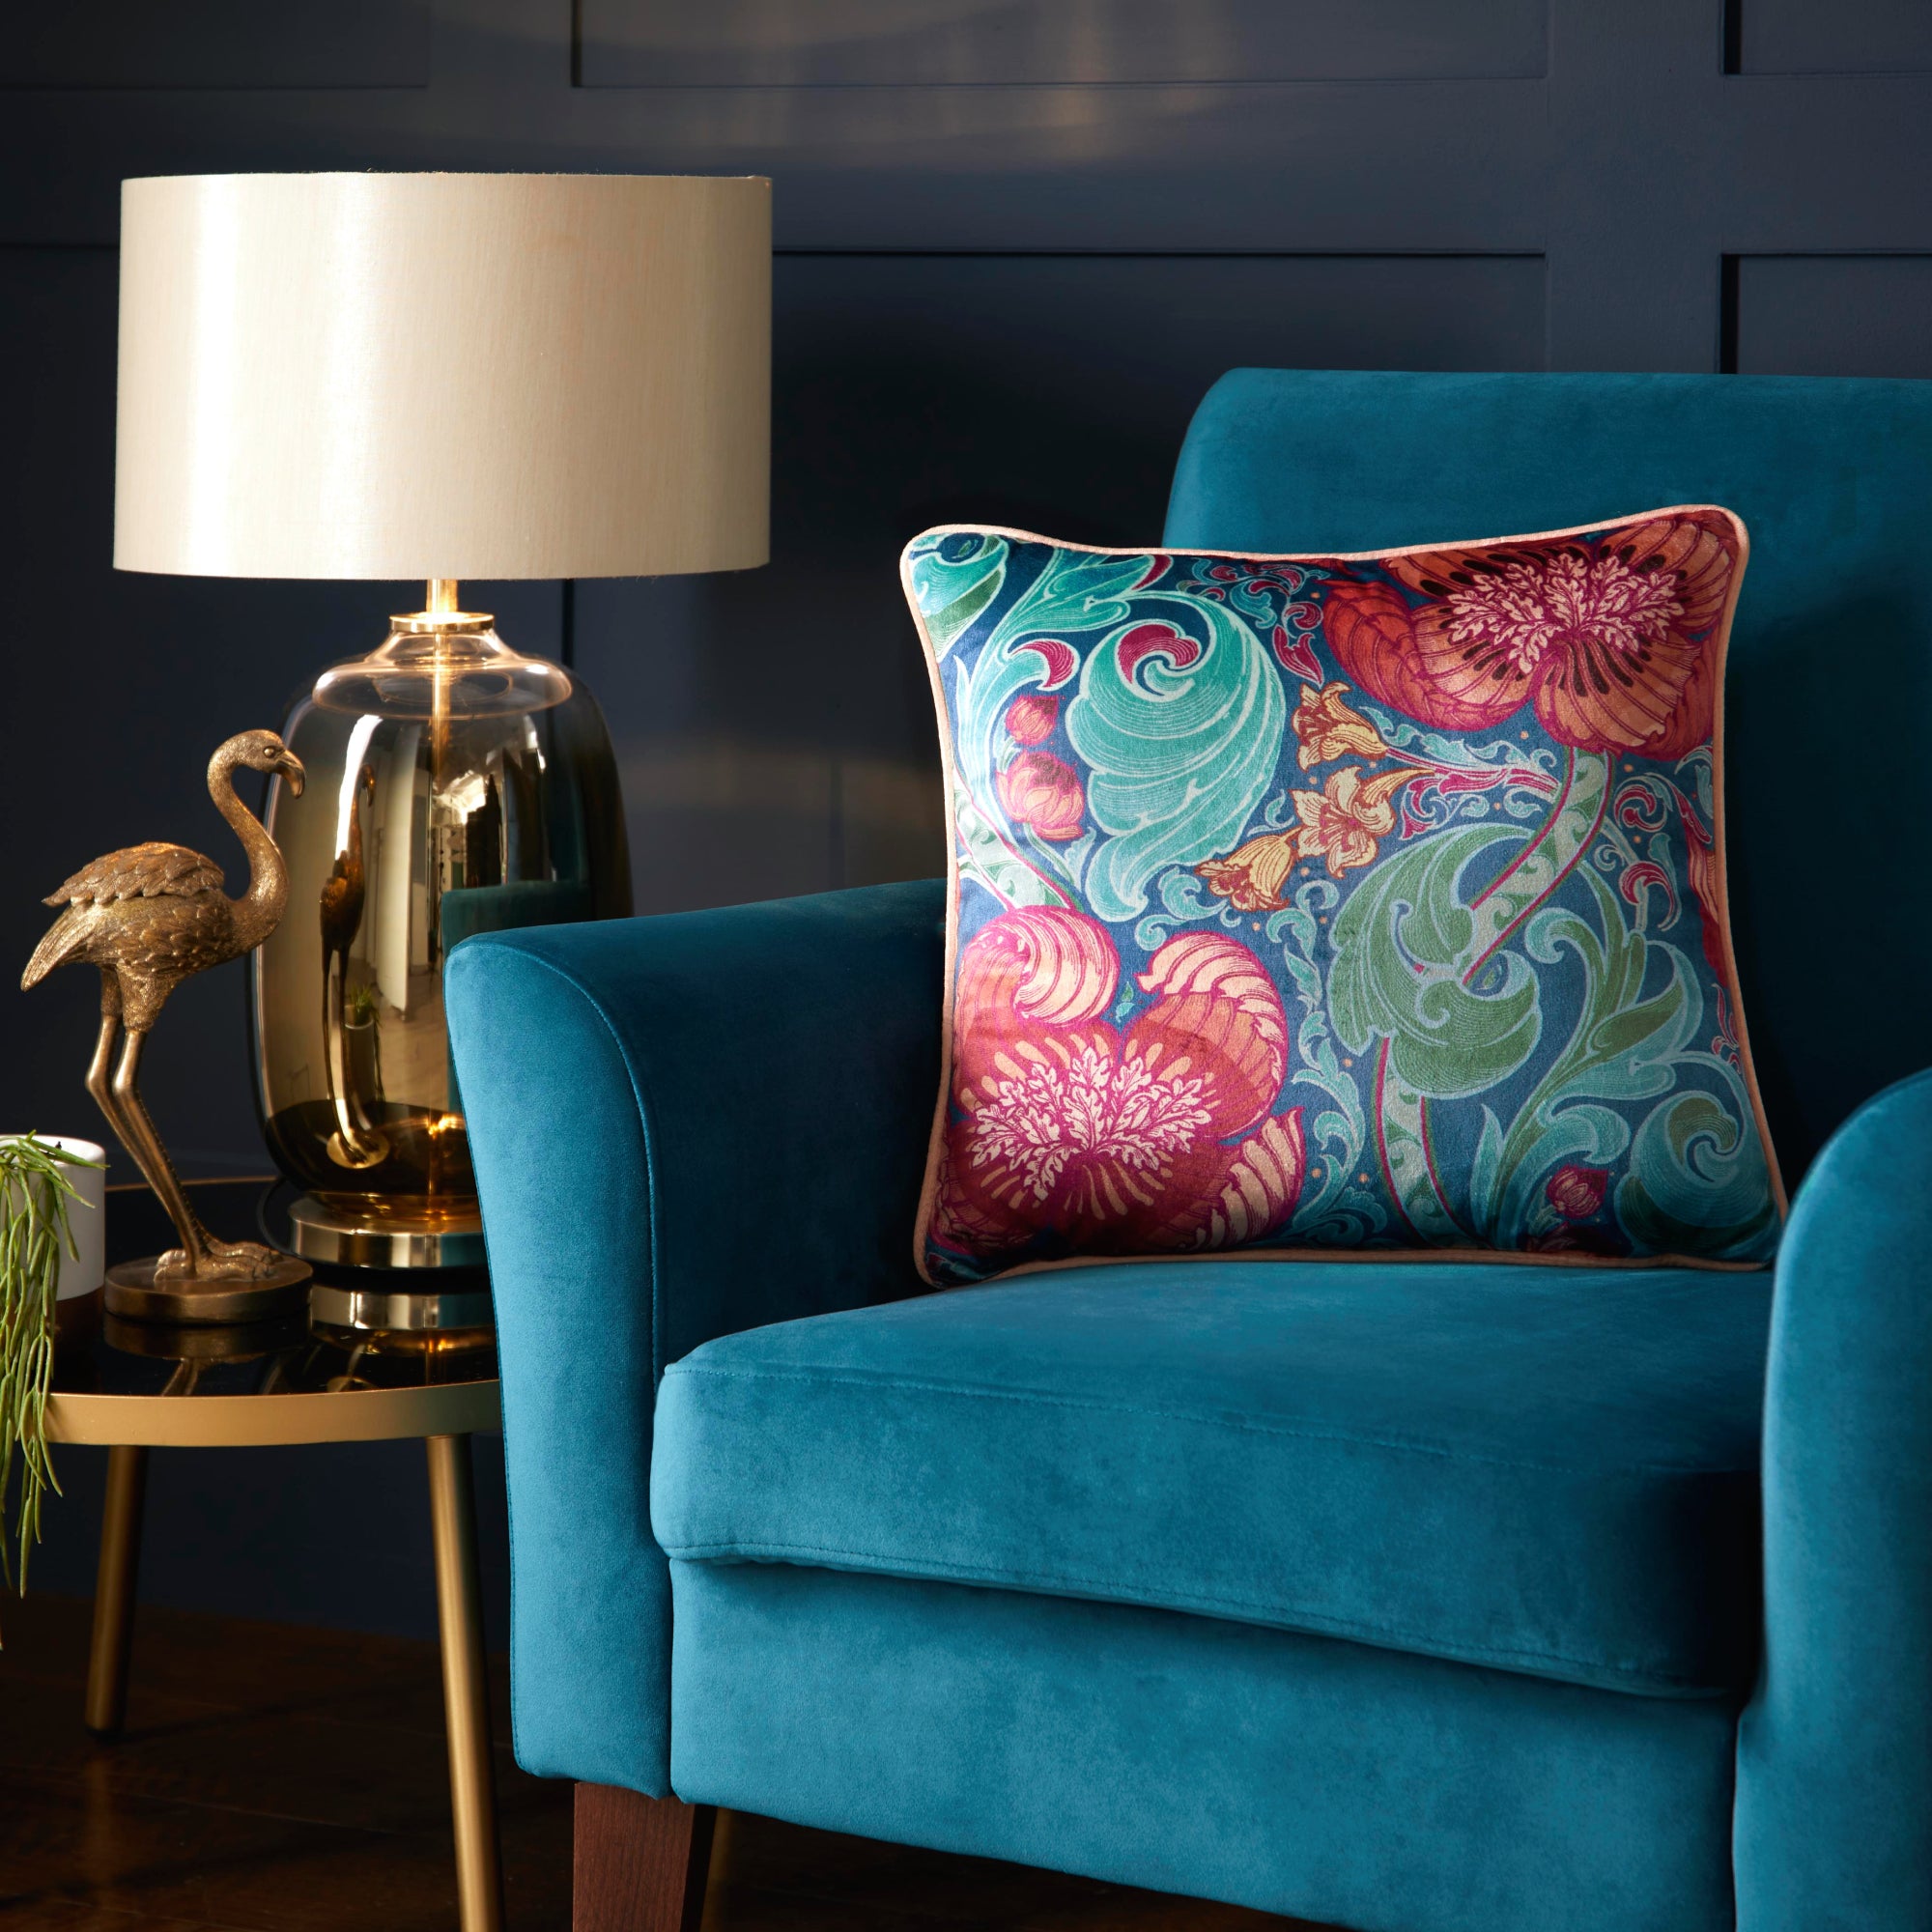 Filled Cushion Down the Dilly by Laurence Llewelyn-Bowen in Blue